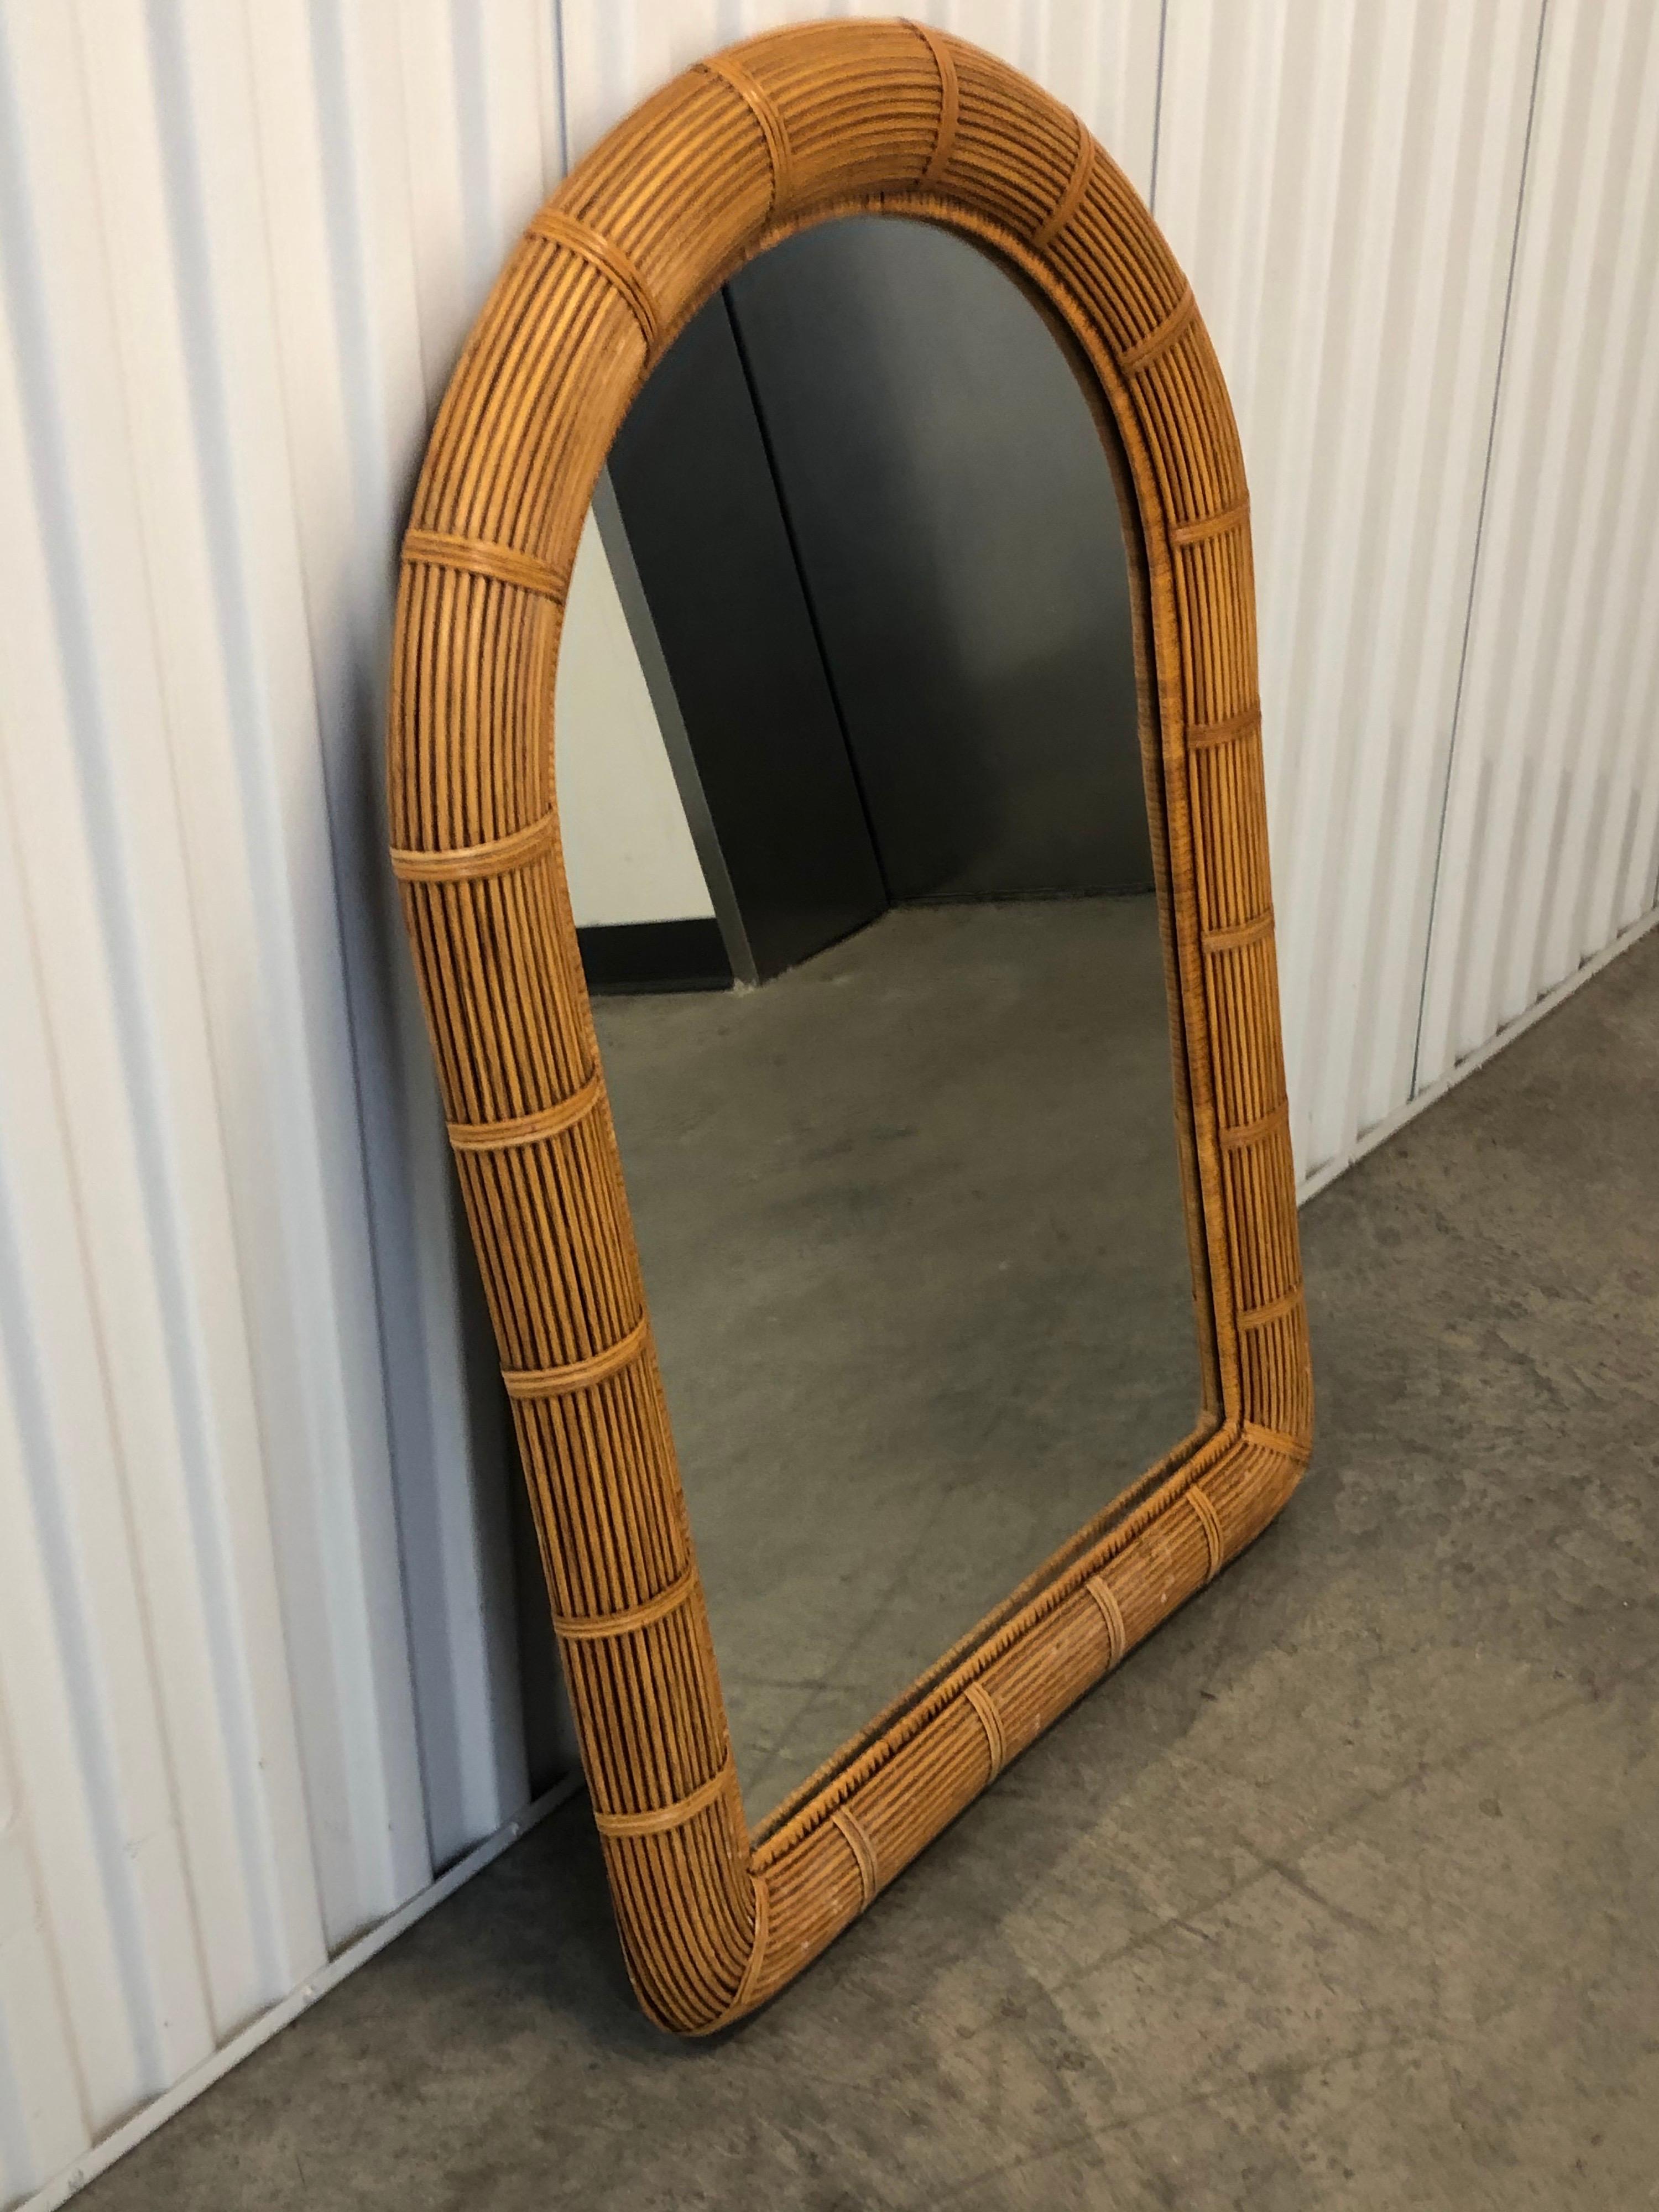 Tall vintage reeded wicker wall mirror with original plywood backing.
Oval top and rounded top frame. Hanging hooks in the back.
Size: 41.5